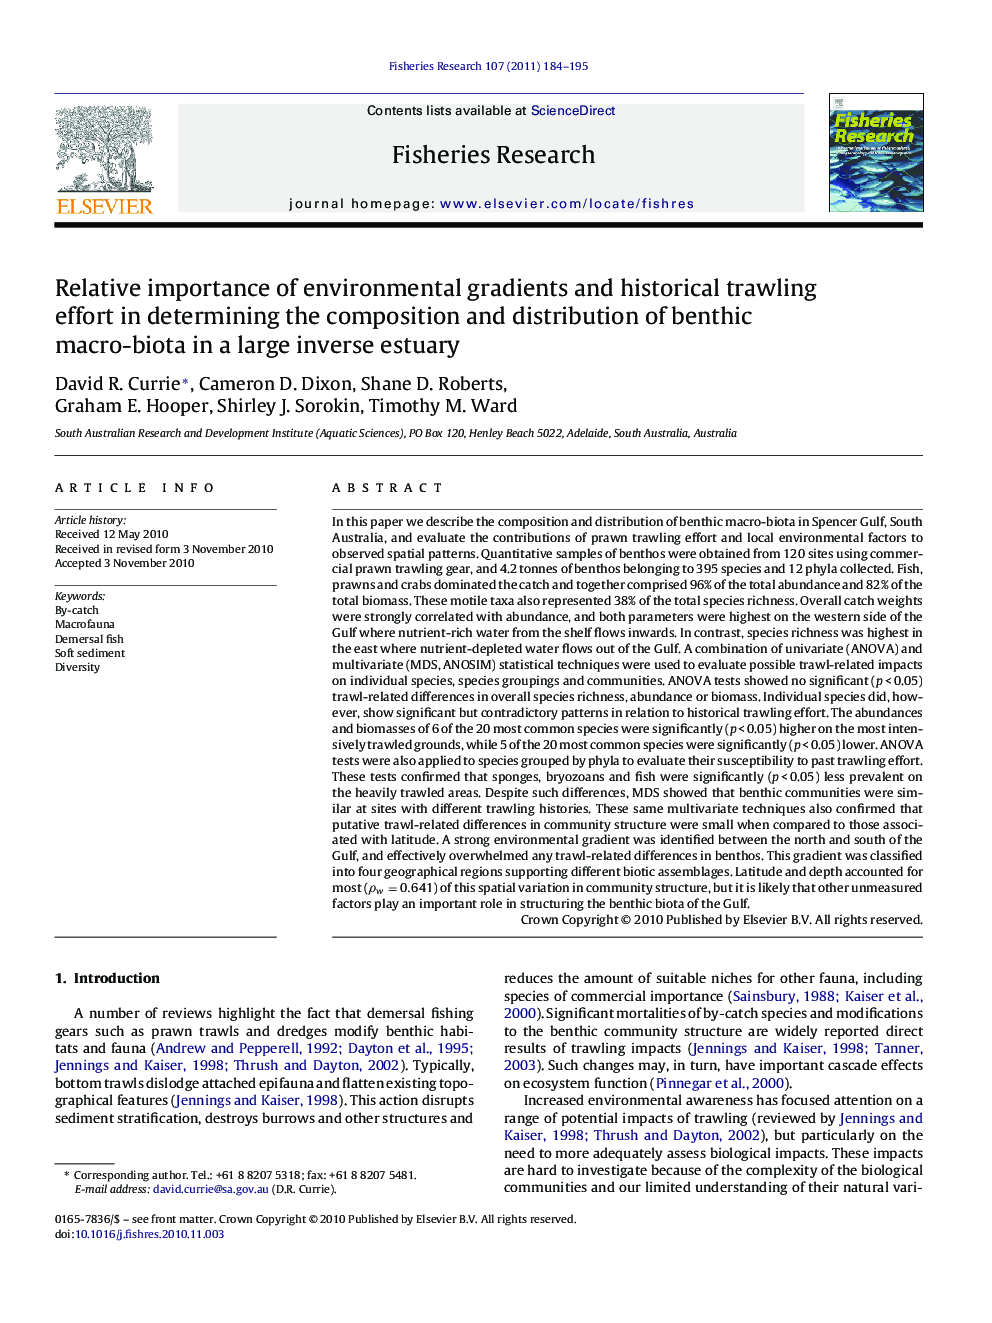 Relative importance of environmental gradients and historical trawling effort in determining the composition and distribution of benthic macro-biota in a large inverse estuary